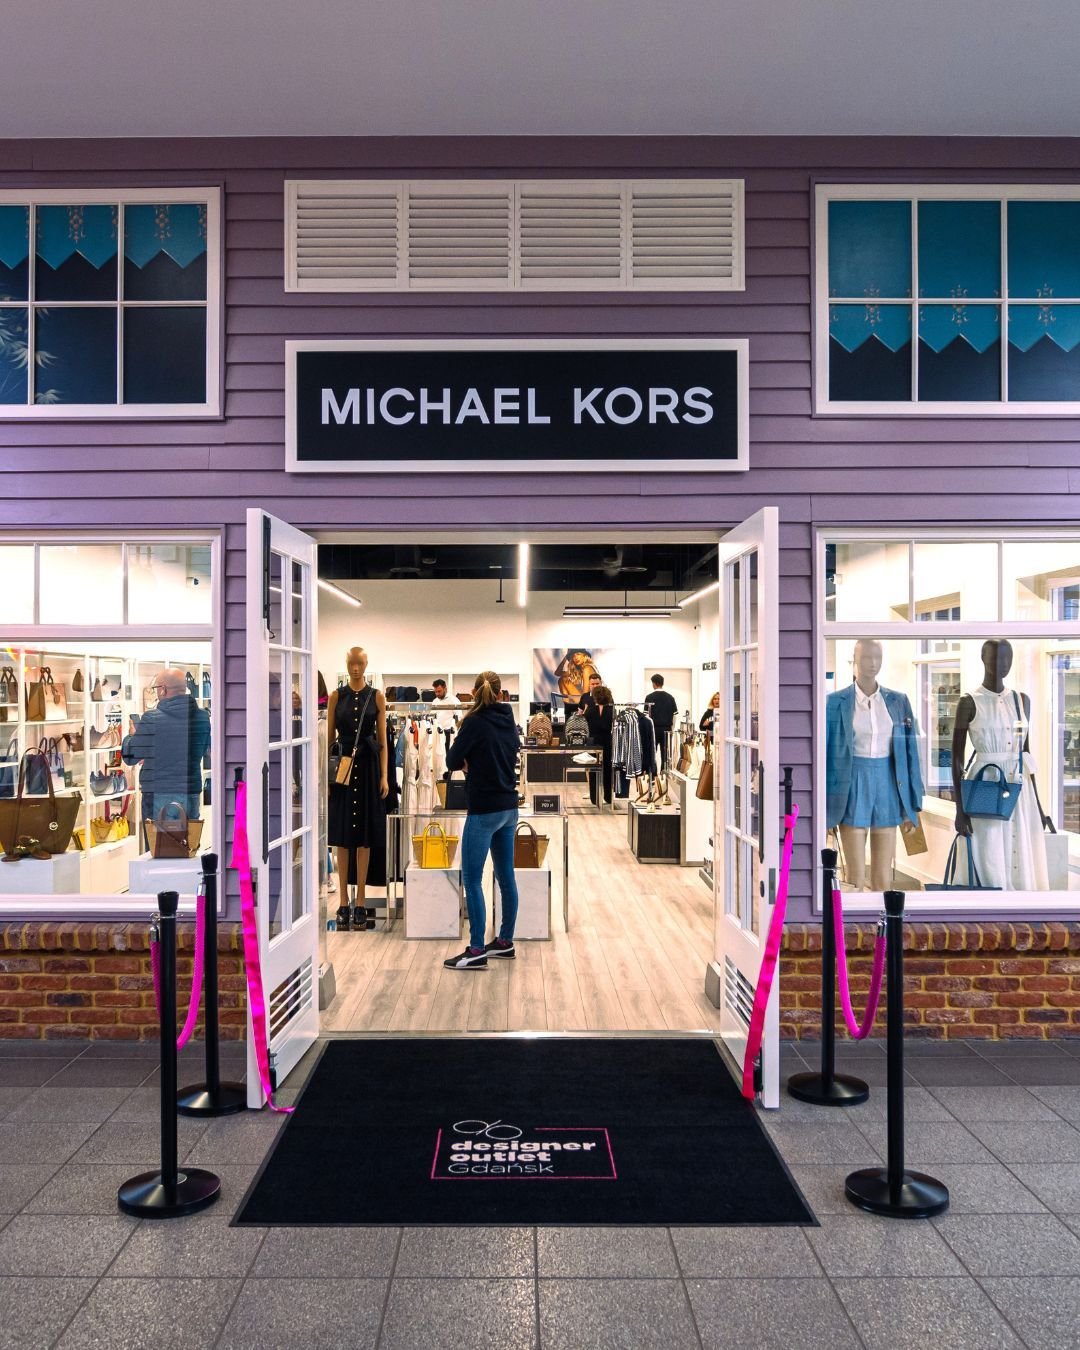 We are very happy to welcome Michael Kors to @designeroutletgdansk! 🤩

The world-renowed #luxury brand opened its doors yesterday to all visitors of the fashion &amp; lifestyle premium outlet destination on Poland&lsquo;s Baltic coast. This is the o